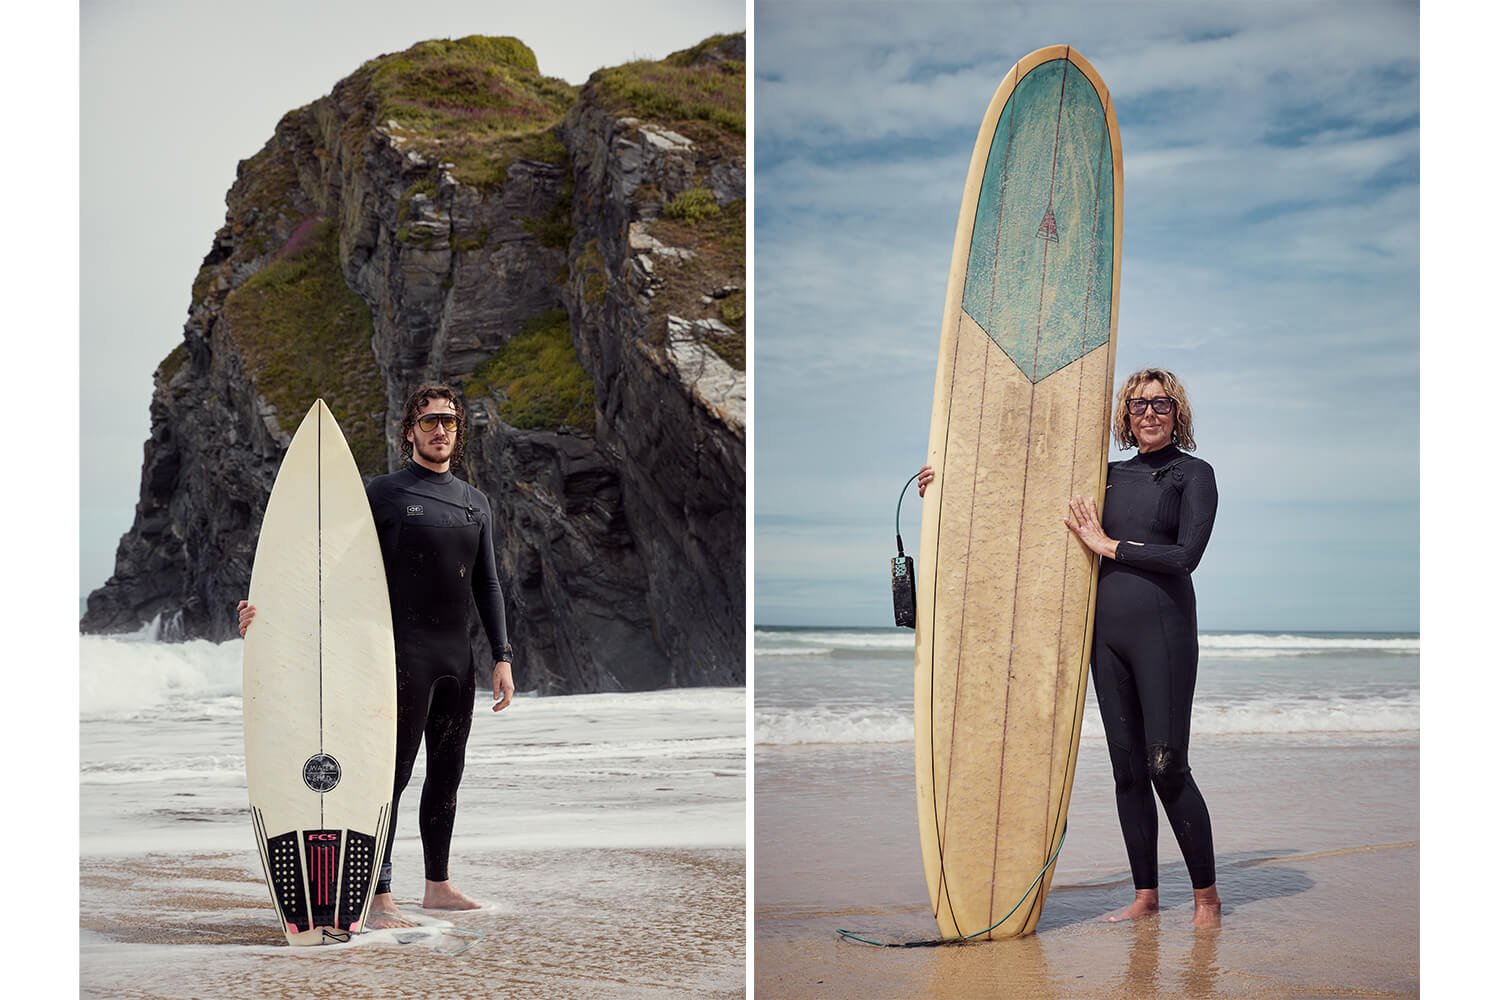 TWO SURFERS STOOD WITH THEIR BOARDS ON THE BEACH